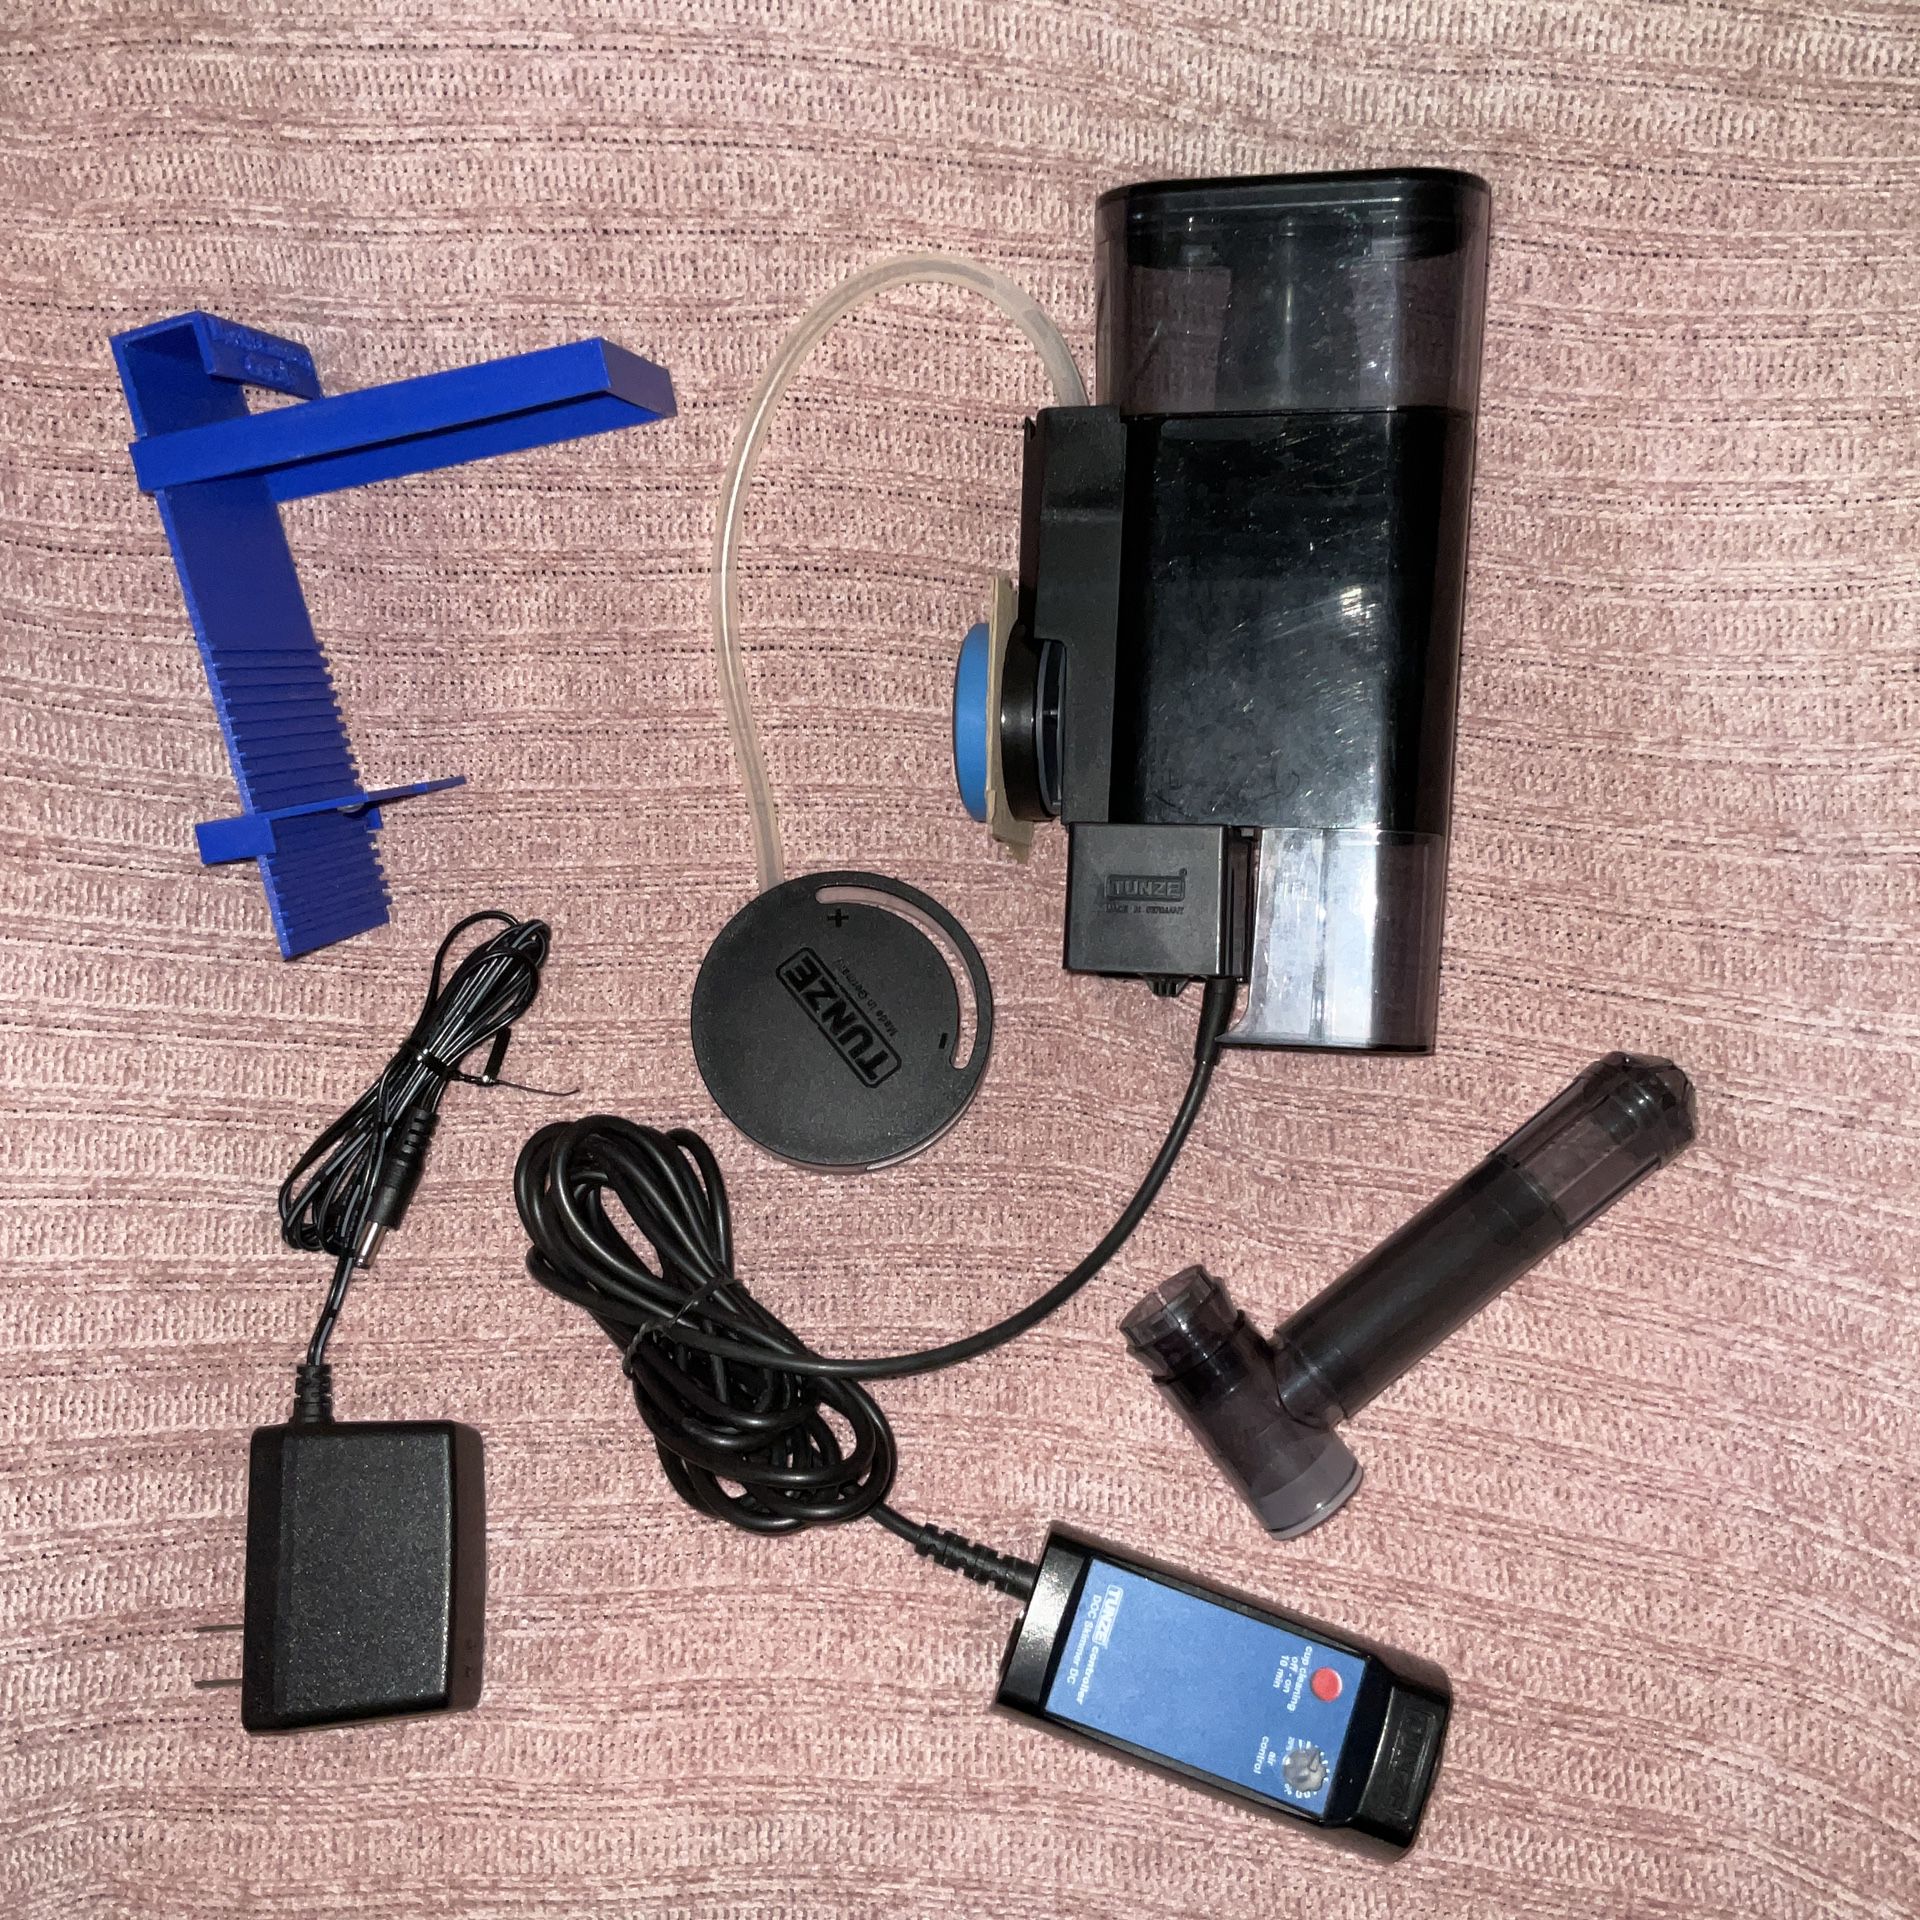 TUNZE DOC PROTEIN SKIMMER 9001 DC with CONTROLLER and 3D Printed Bracket